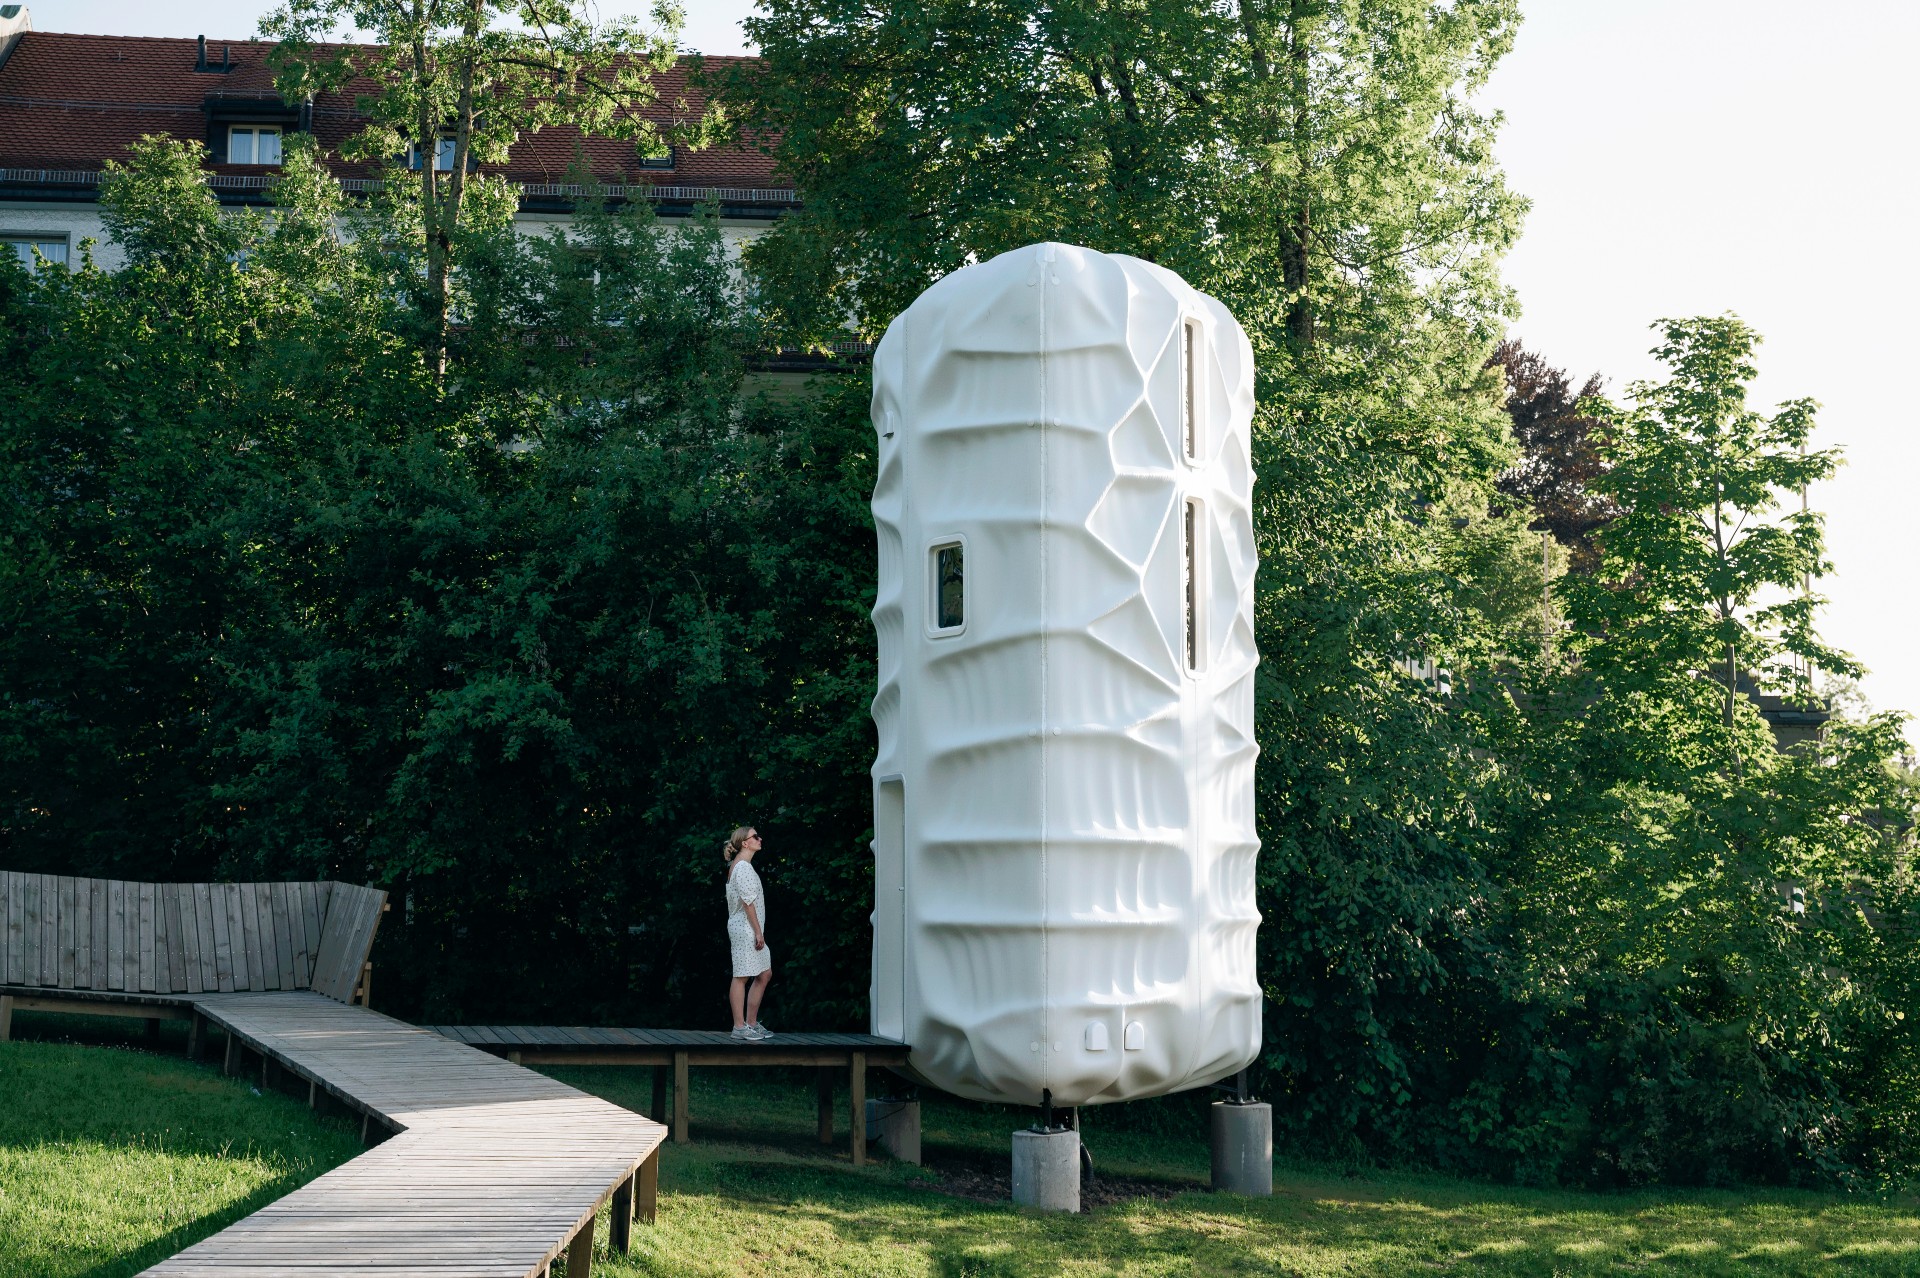 ROSIE - The tallest 3D-printed polymer structure in the world